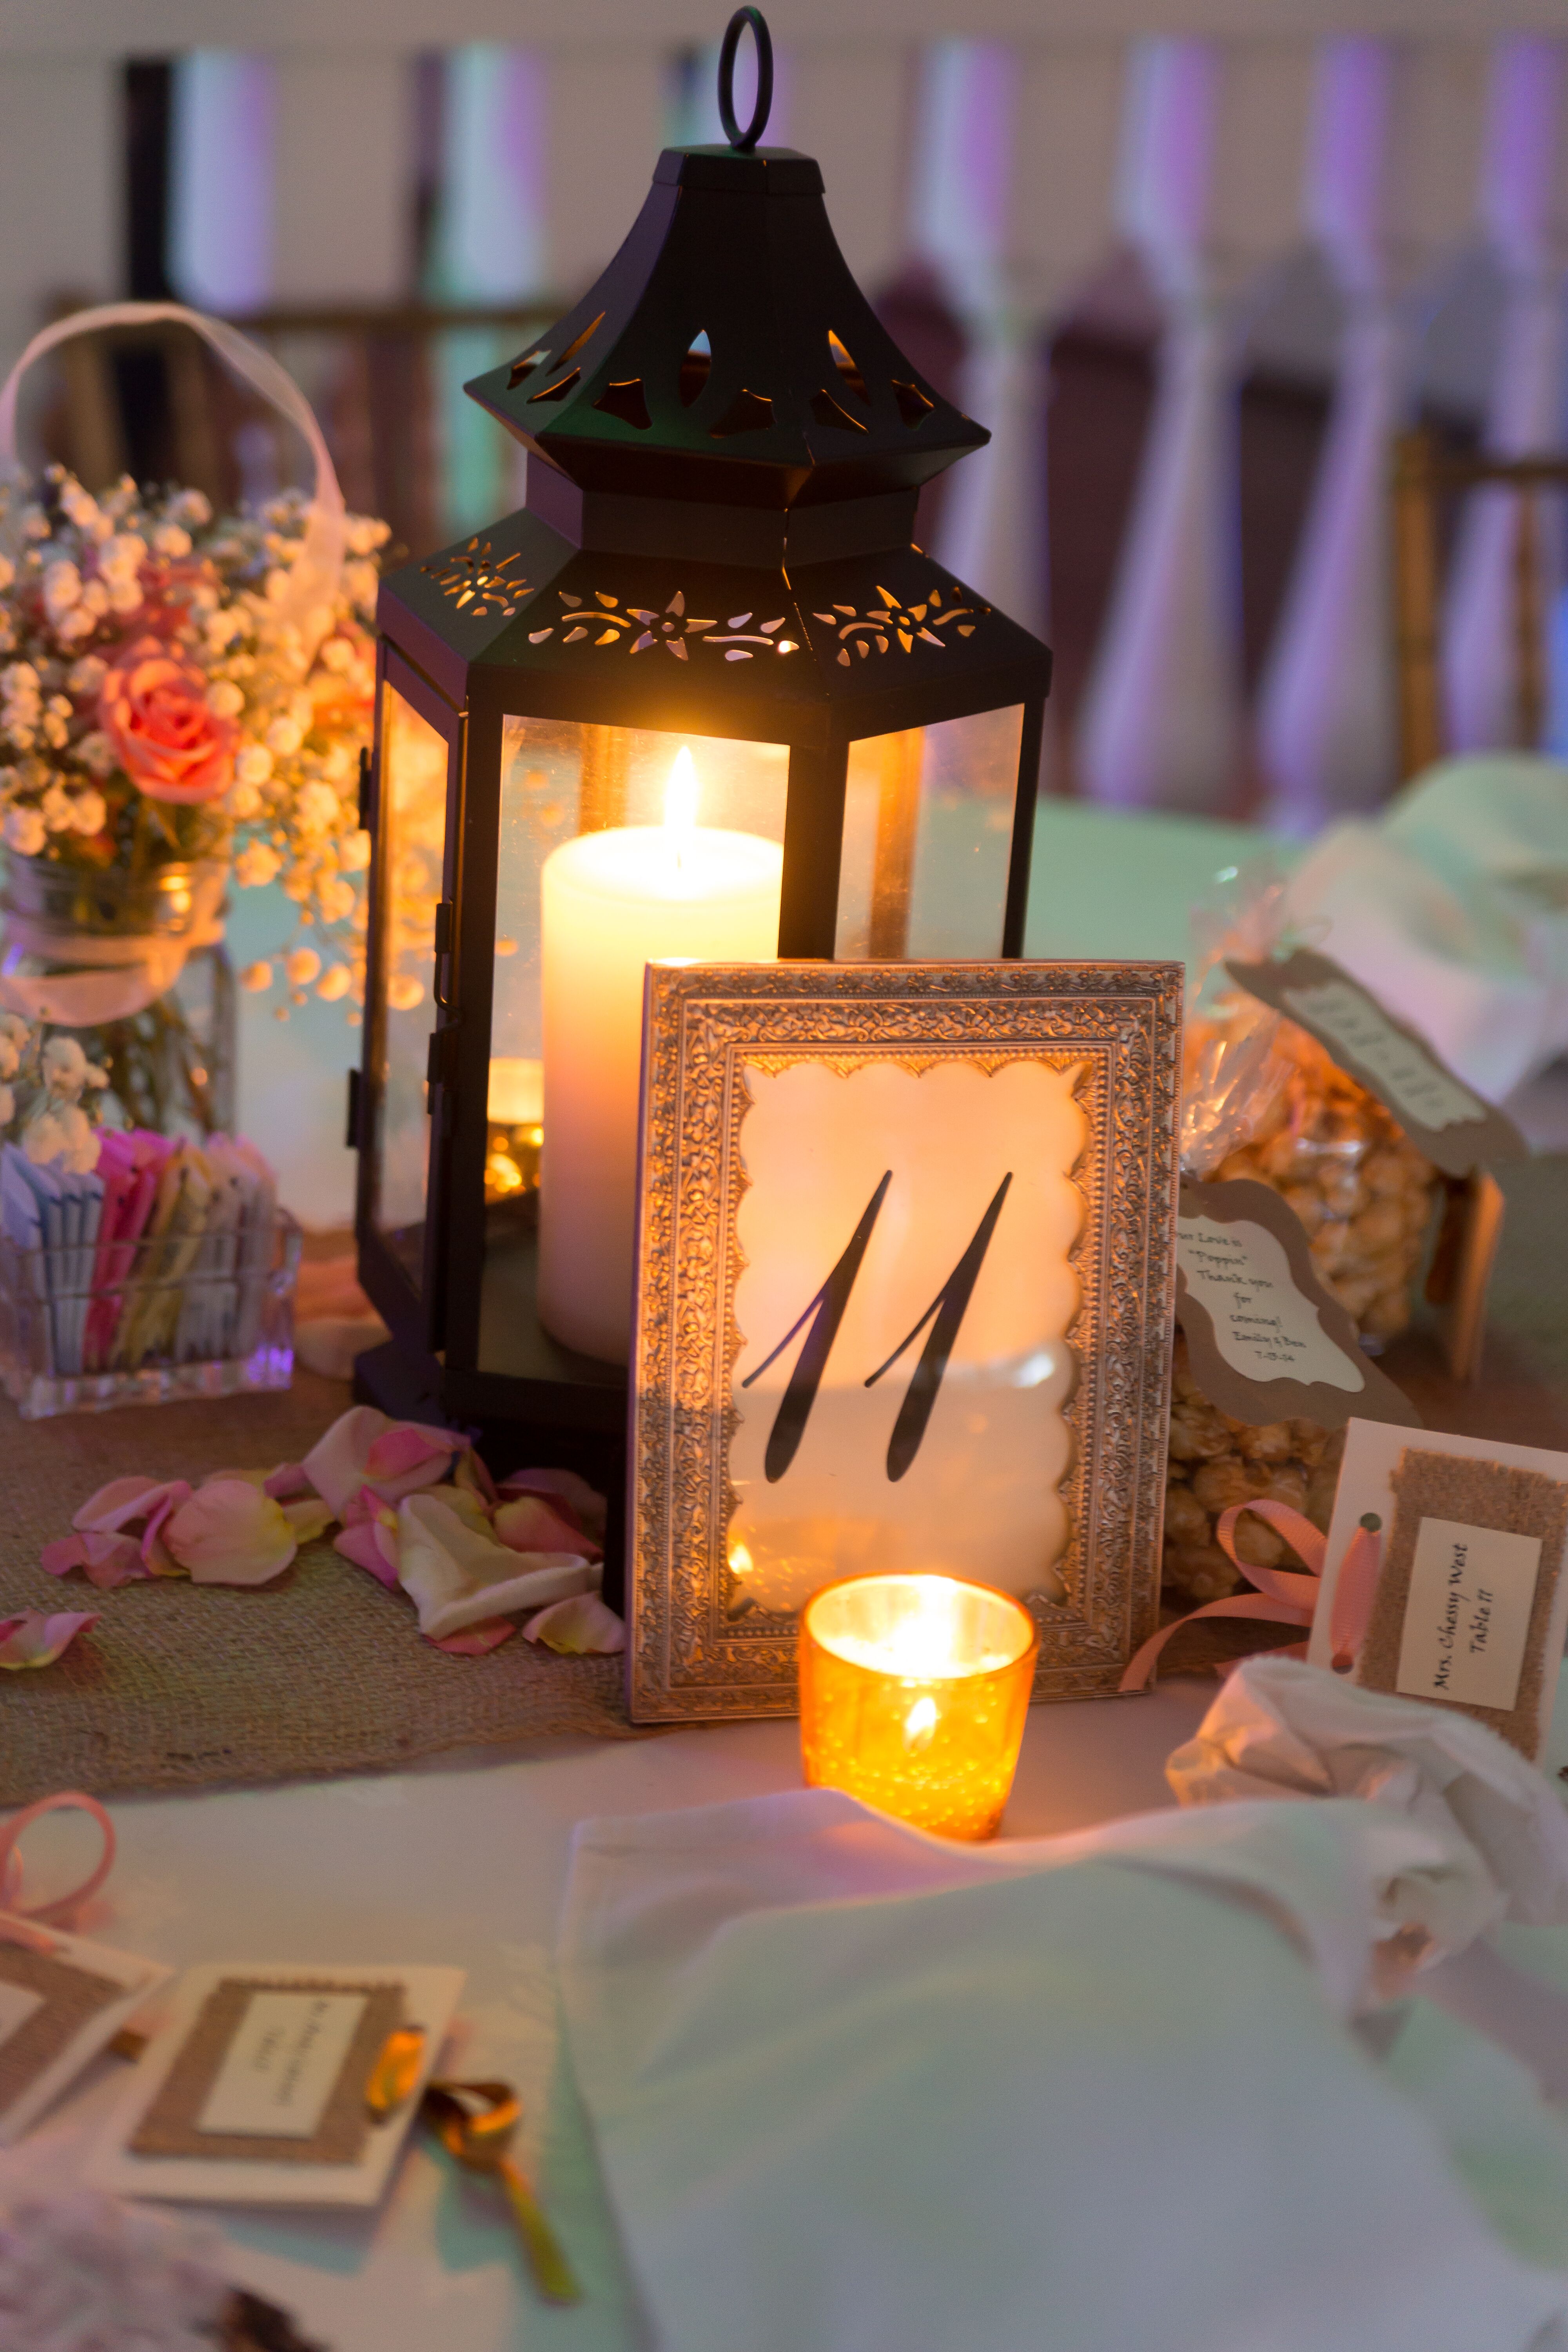 Iron Lantern Centerpieces With Candles And Coral Roses